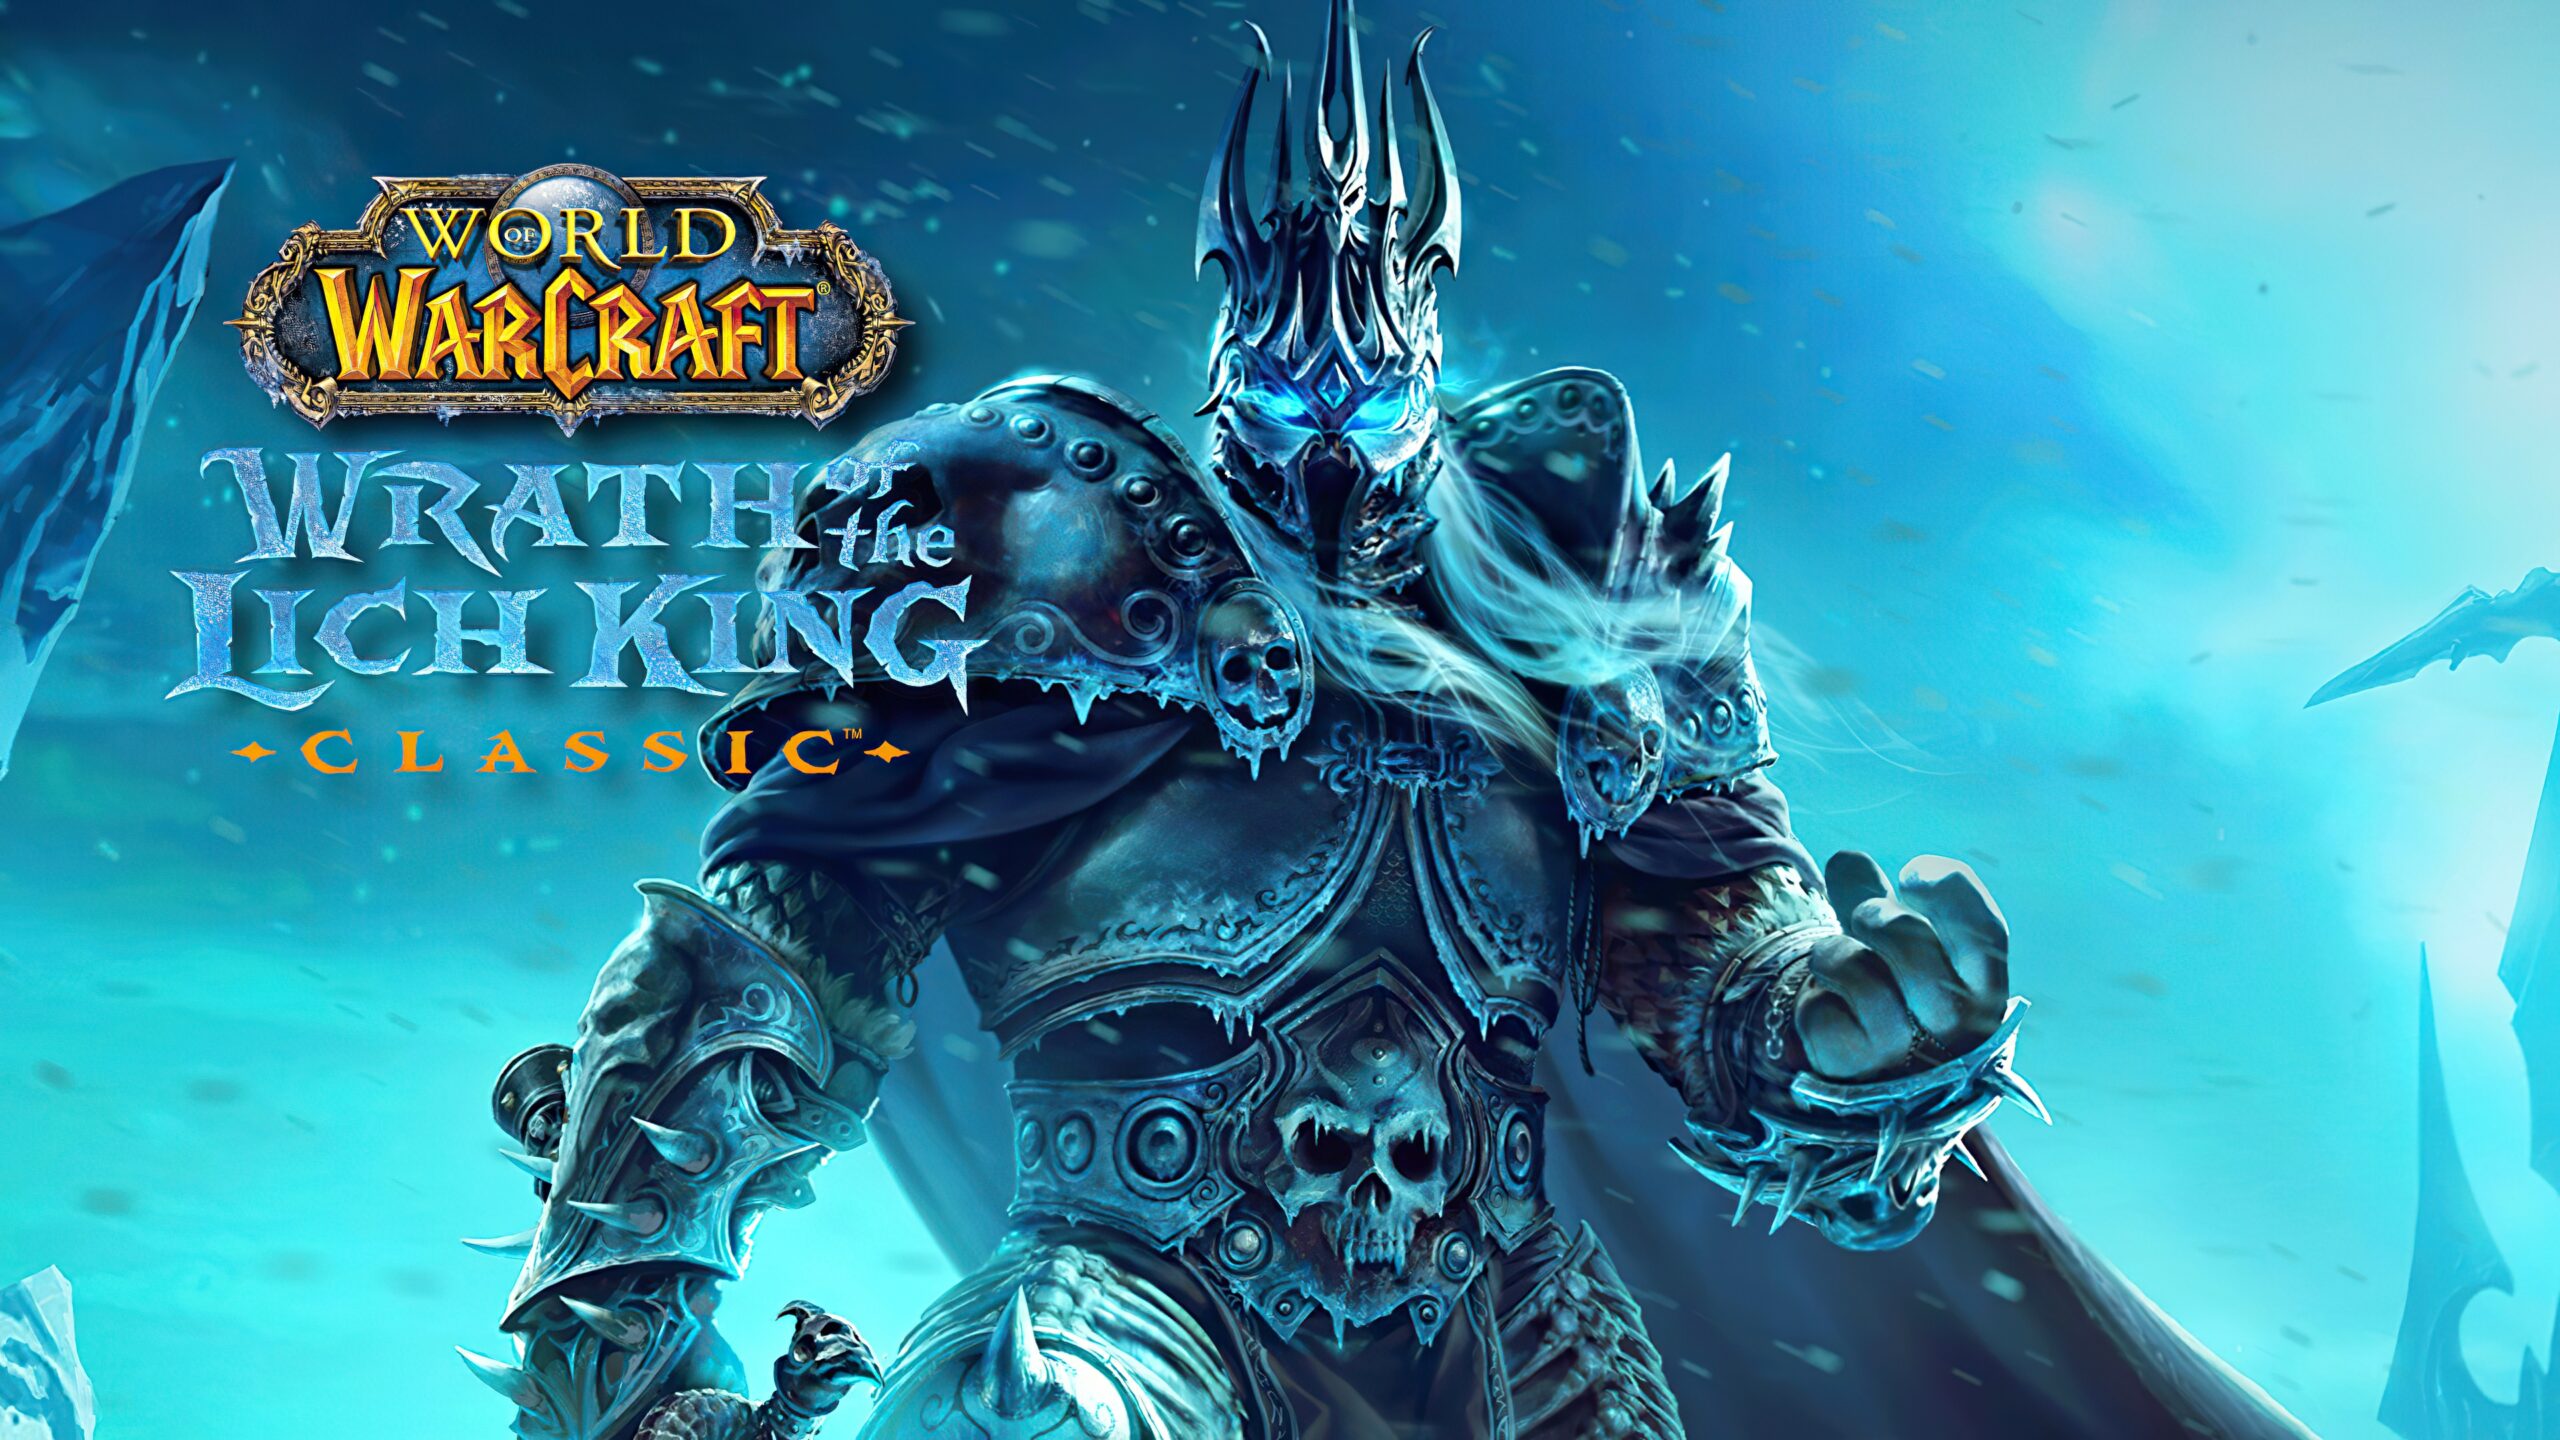 Wrath of the Lich King Classic Upgrade Now Available: Content, Price and More